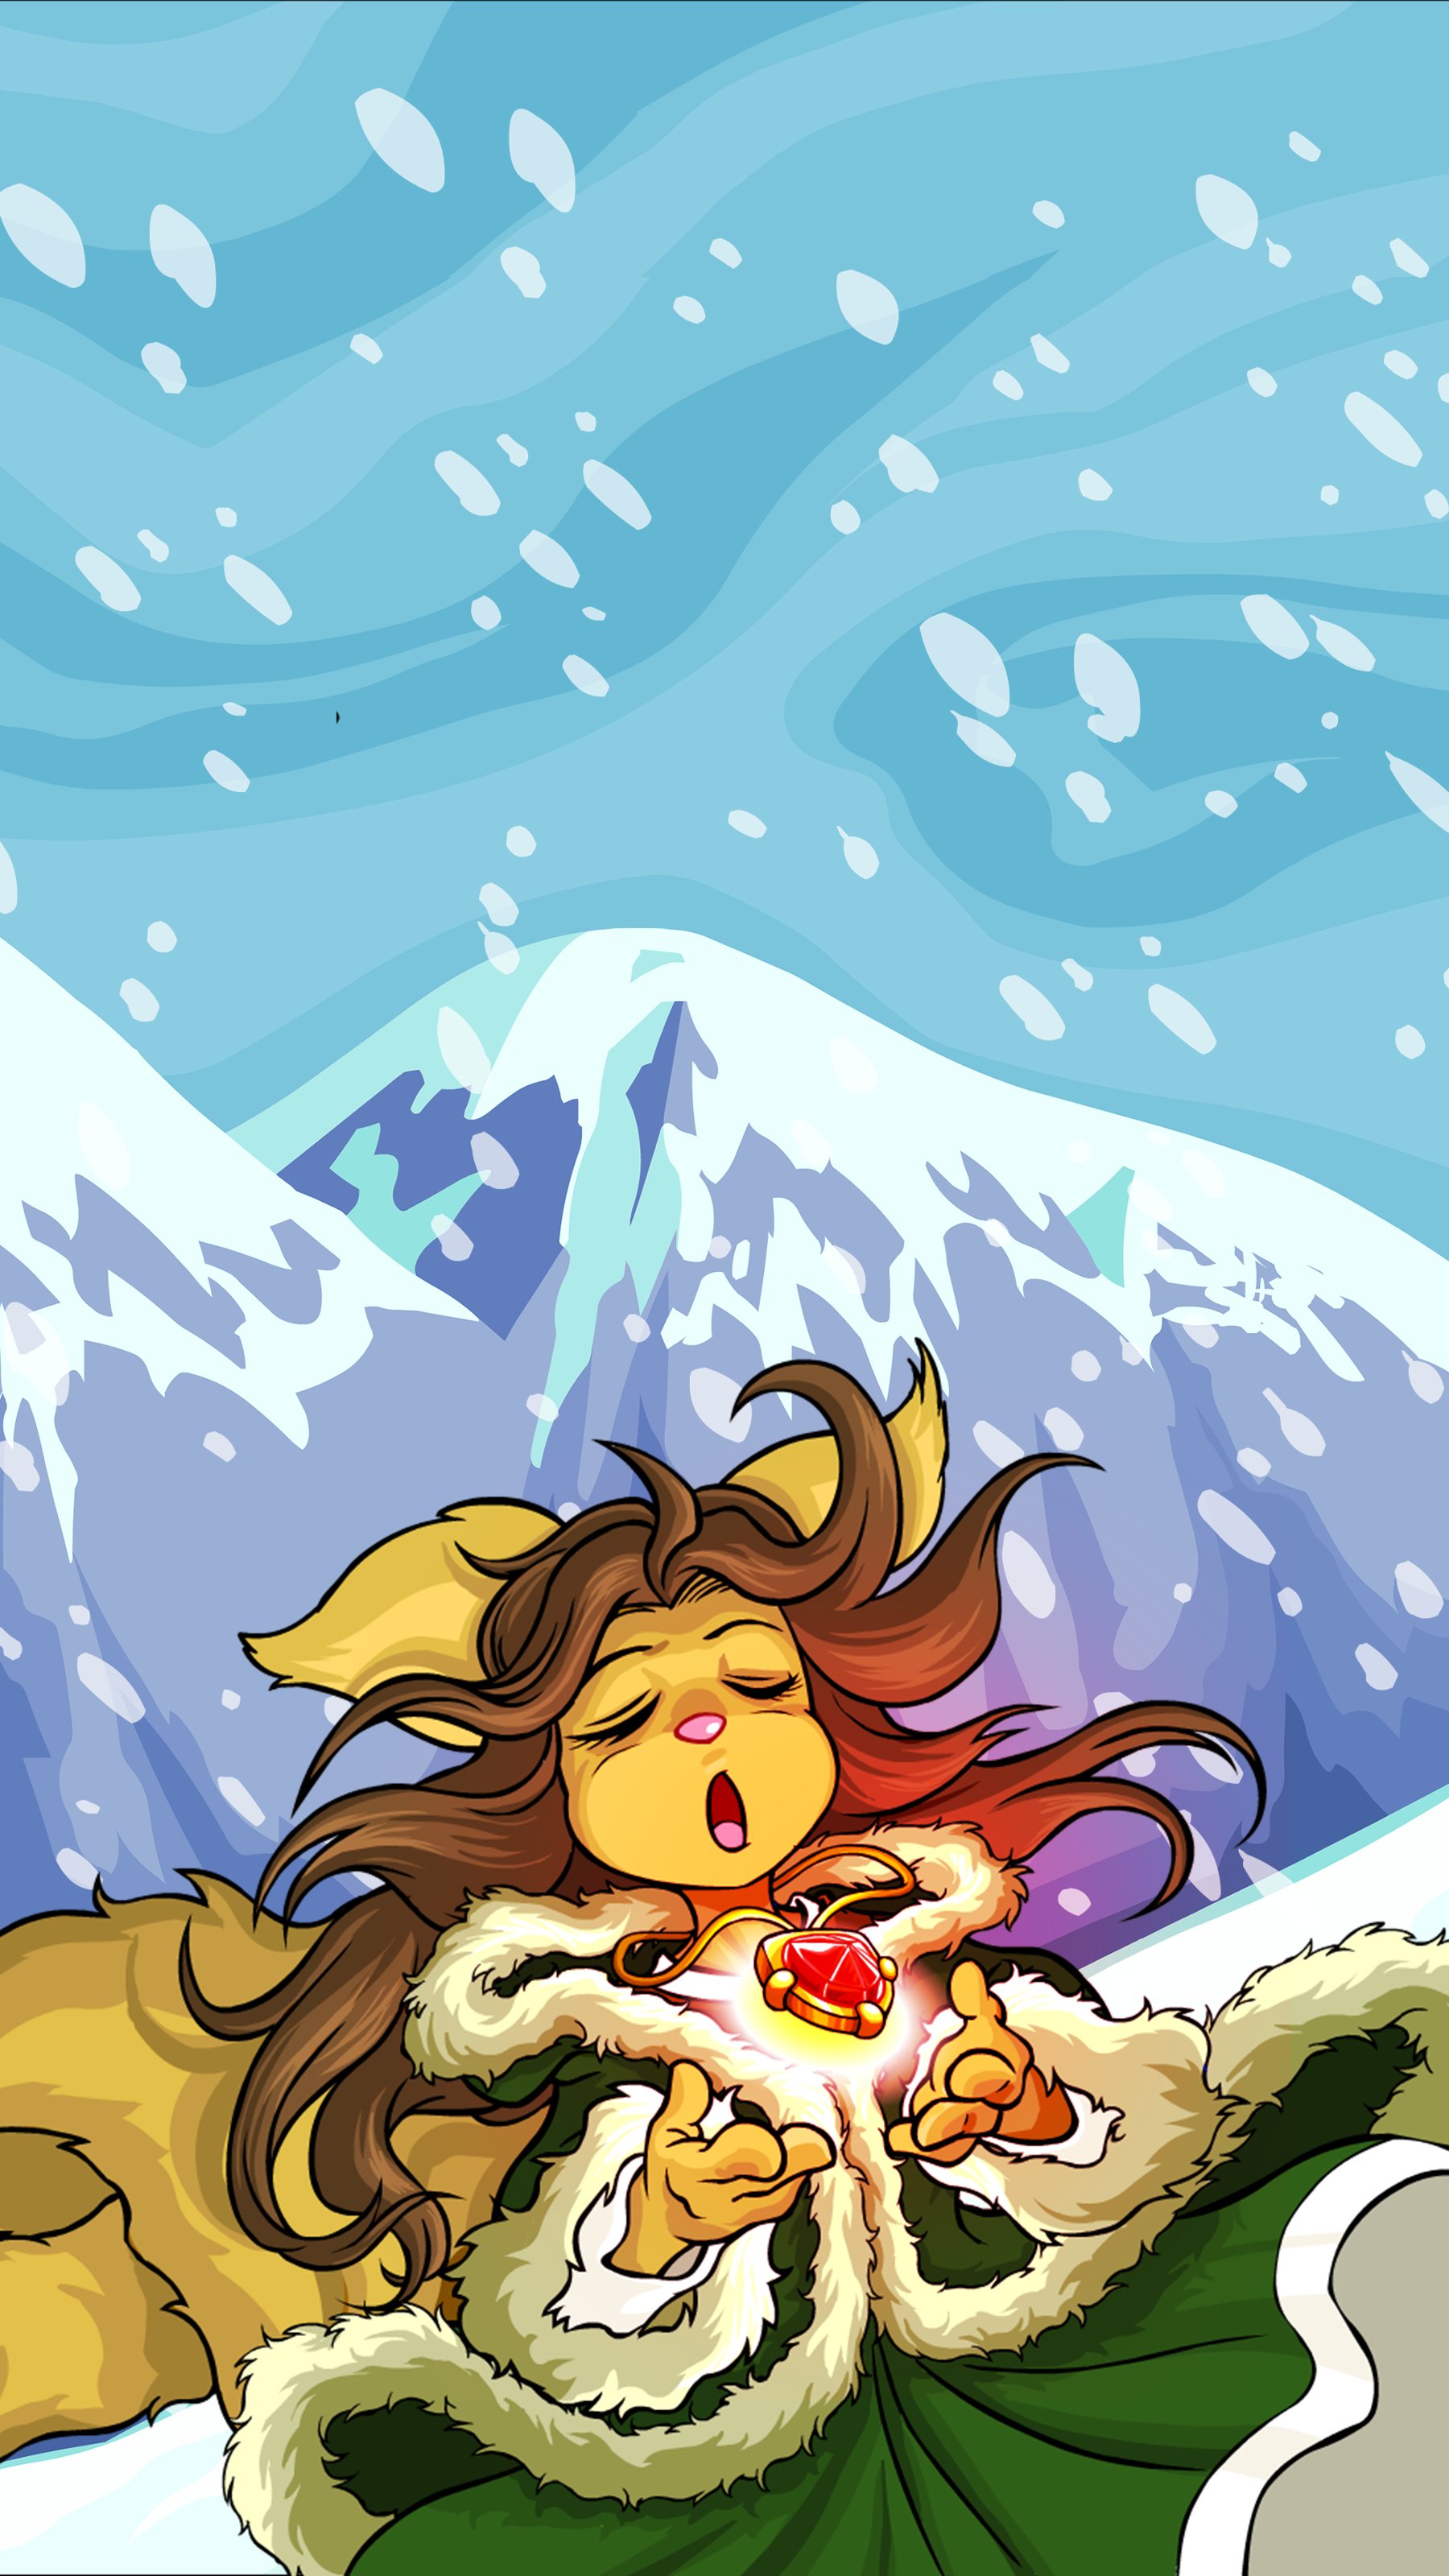 neopets a new phone wallpaper? Pick one of these amazing new Neopets wallpaper and enjoy!